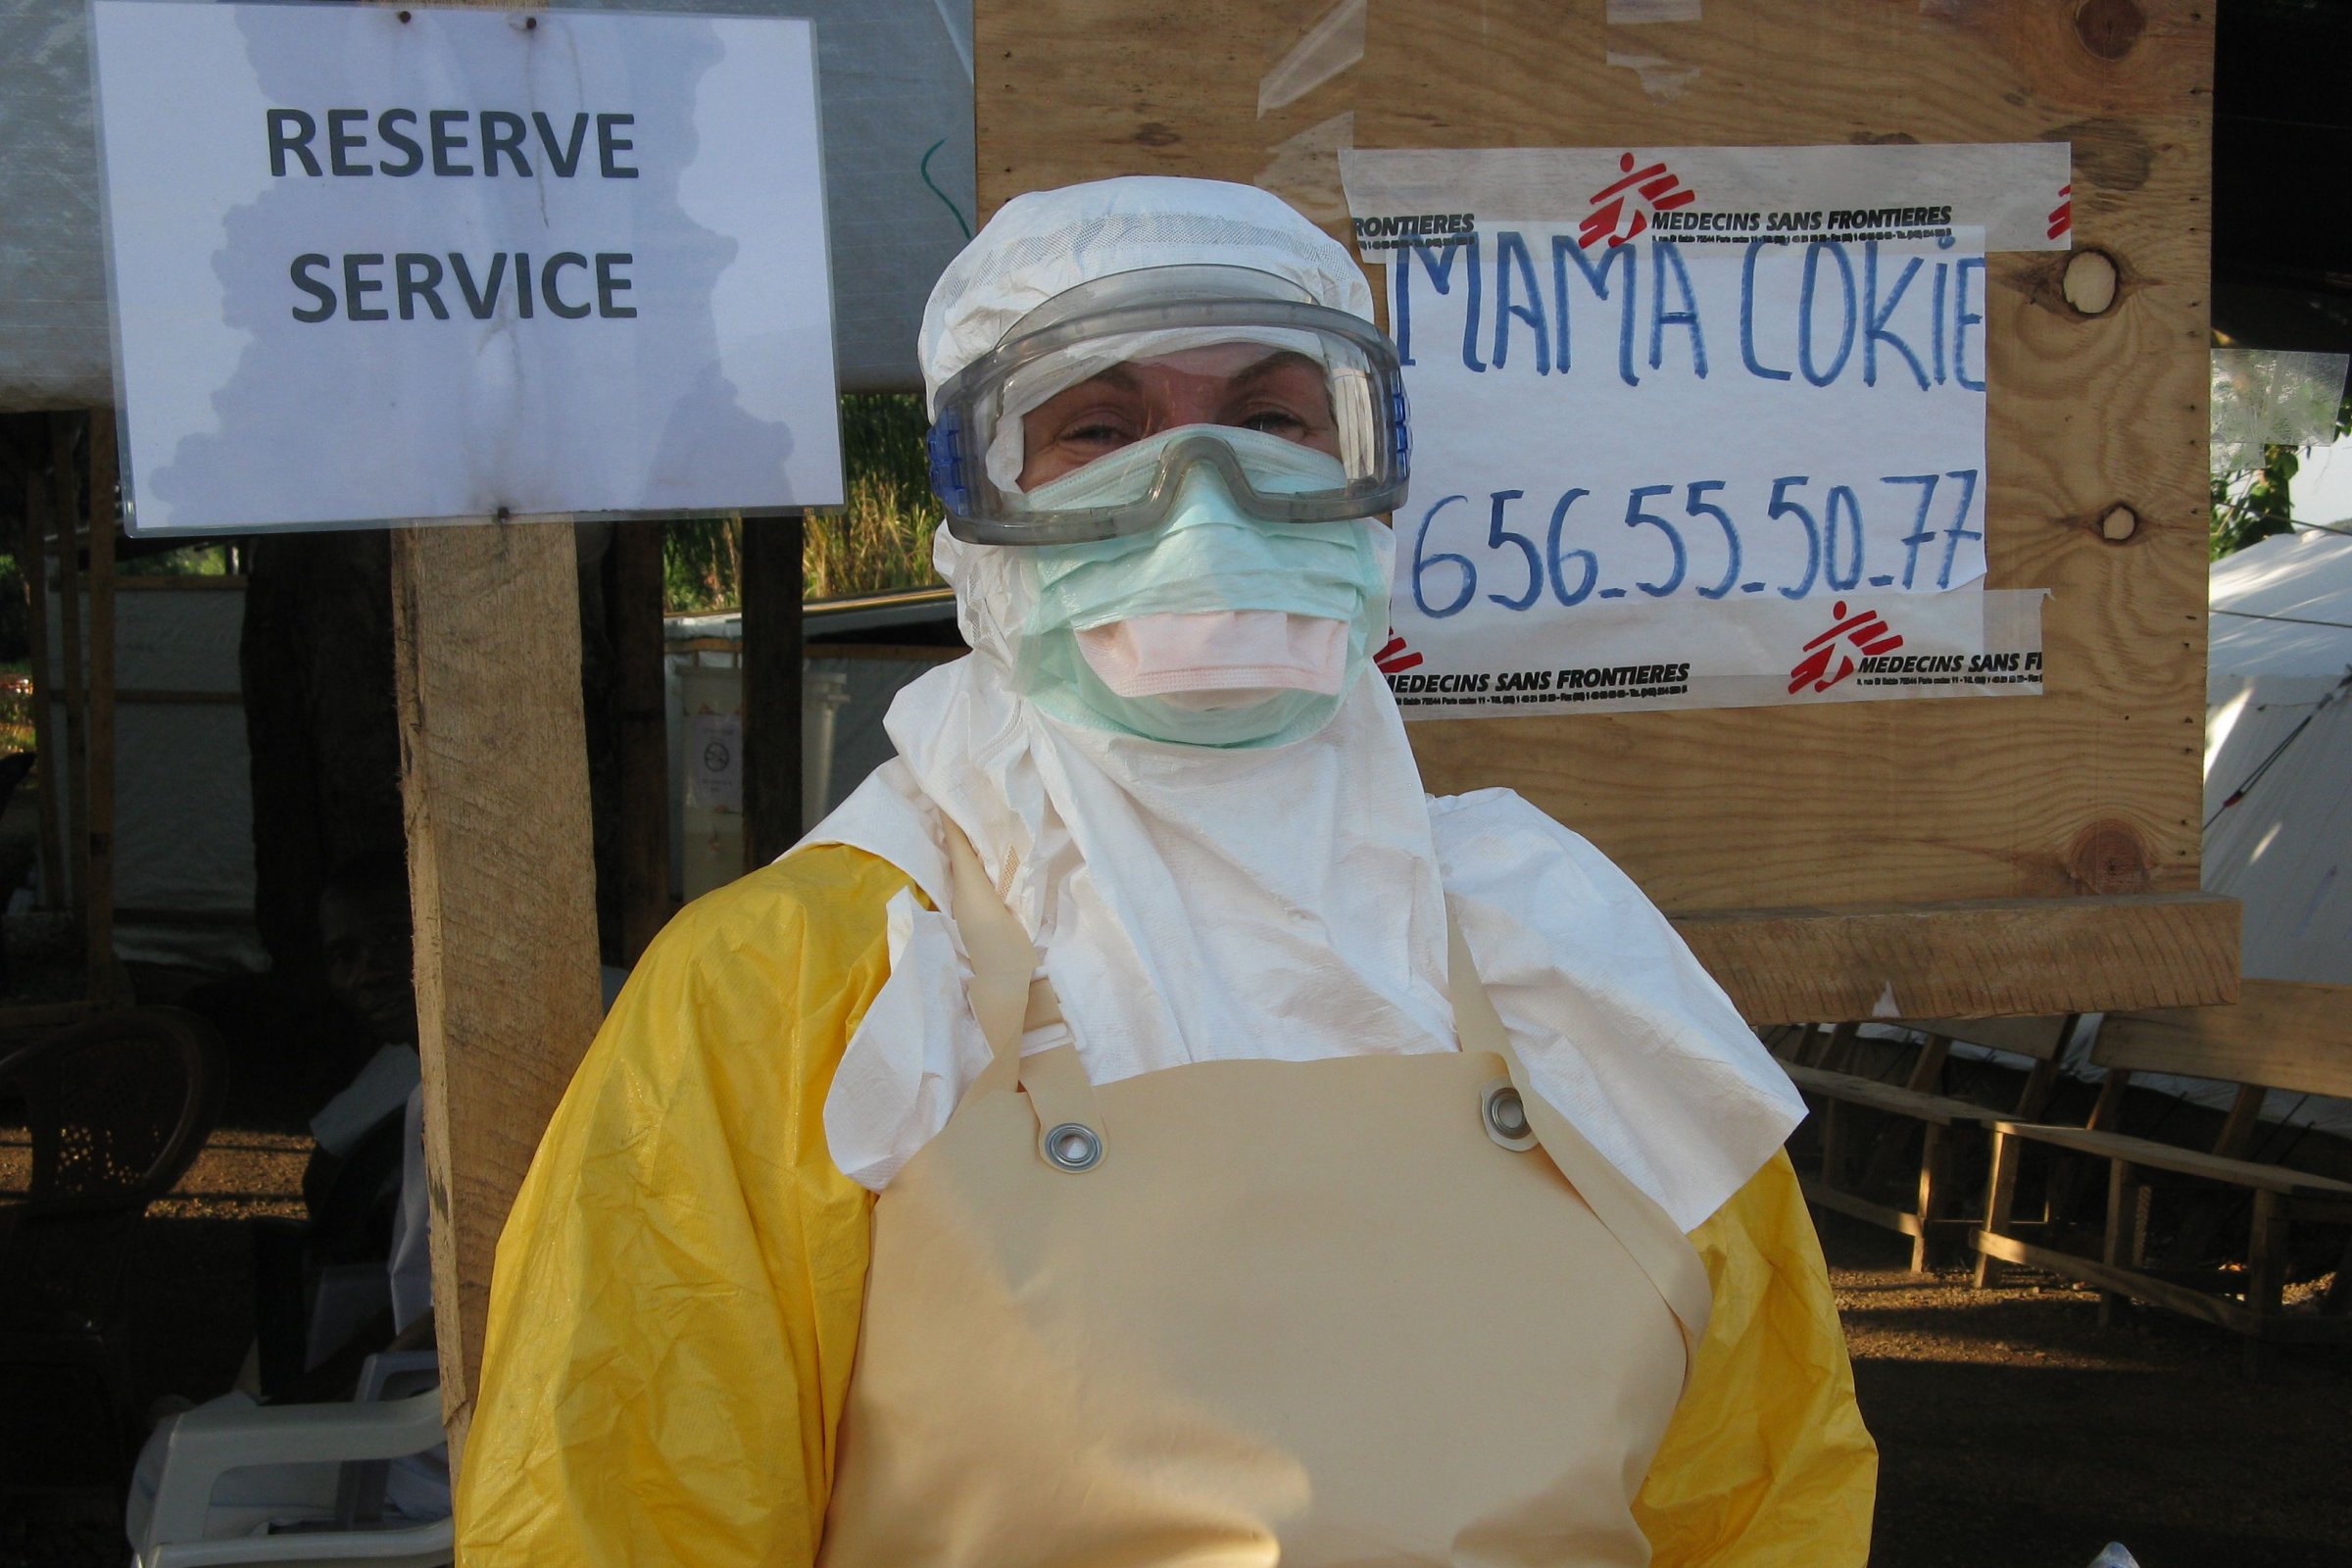 Cokie in her personal protective equipment for MSF